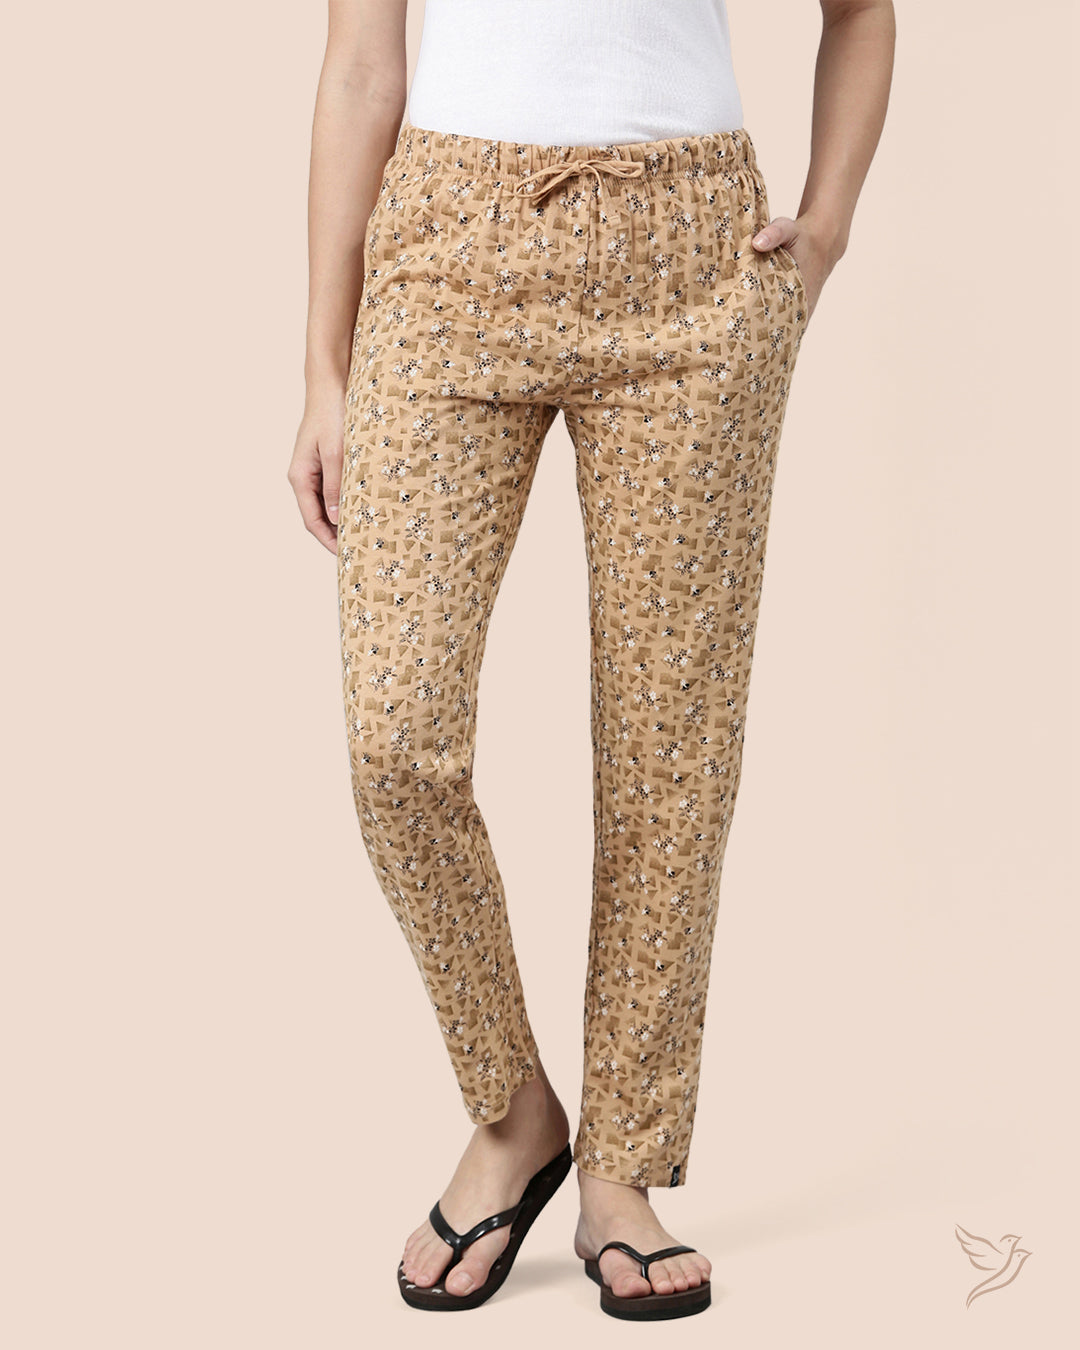 Beige Printed Loungewear Pant for College girls